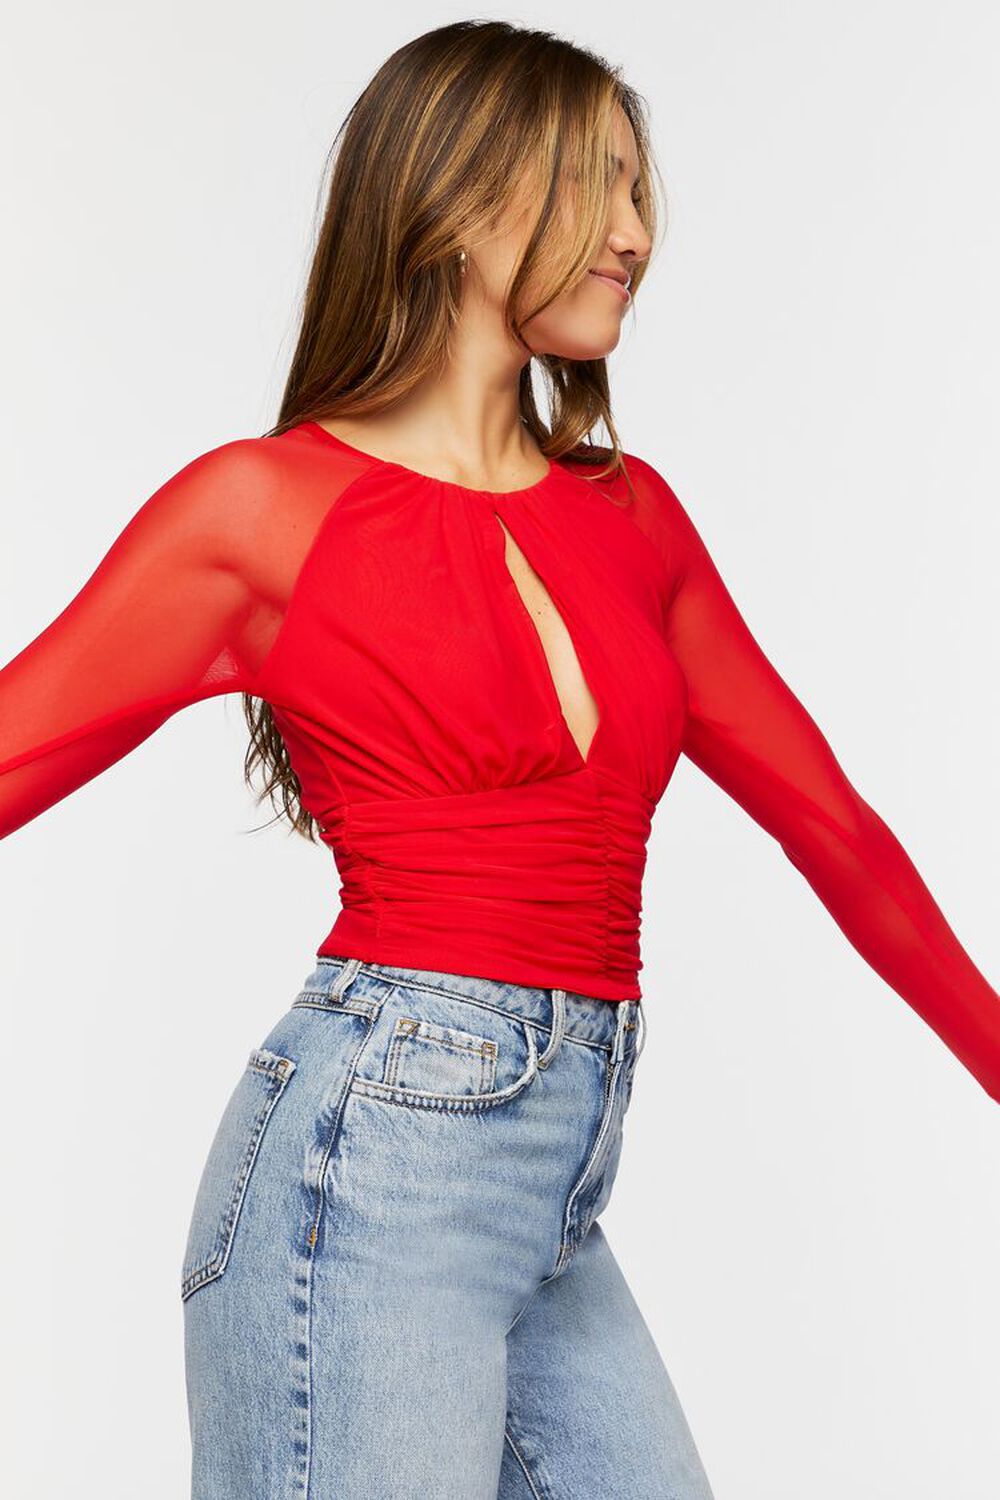 BERRY Ruched Mesh Cutout Crop Top, image 2